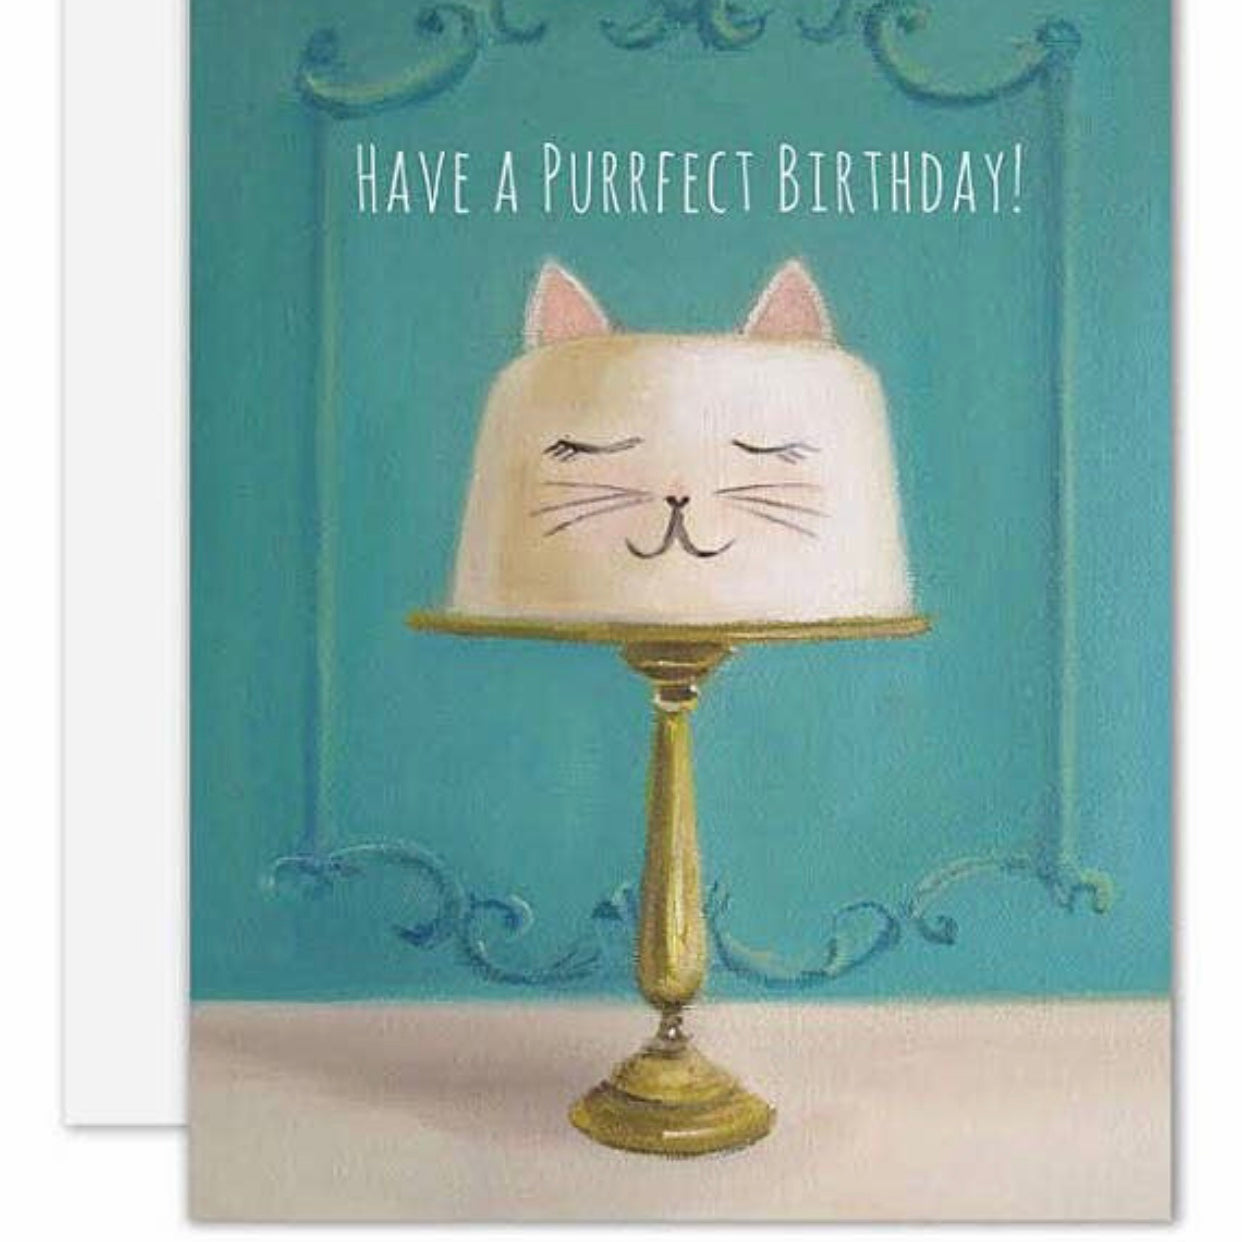 have a purrfect birthday greeting card